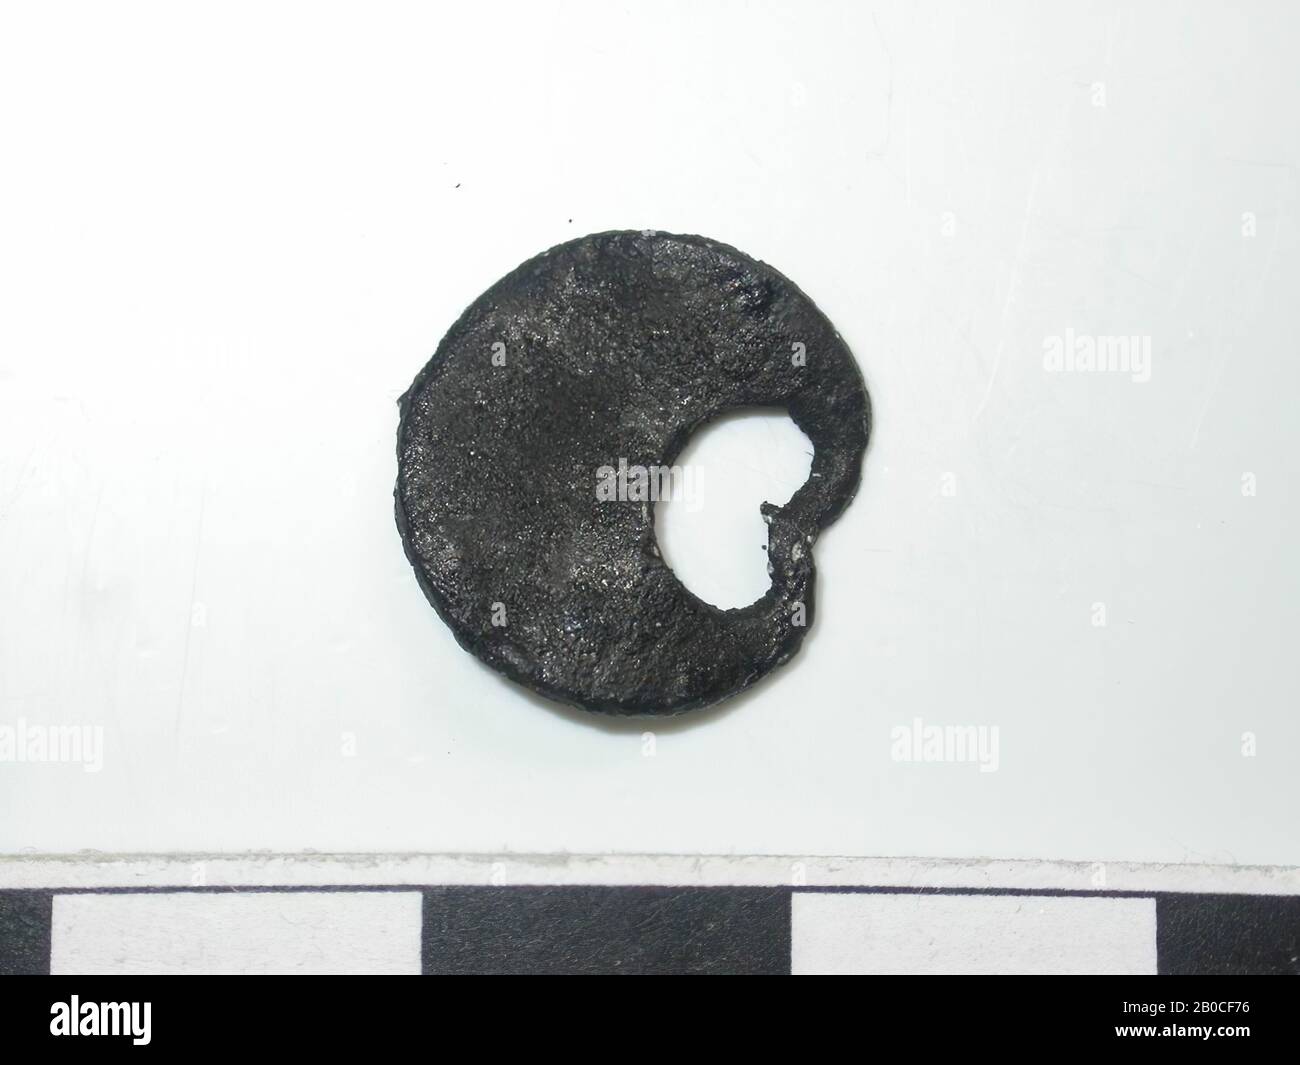 Half moon, golden with dark spots. Flat crescent, with the ends together. Back is flat and has a seam. 1 pin attachment. Pin is not measurable., Belt stroke, metal, copper alloy, L: 1,4 cm, W: 1,3 cm, D: 0,1 cm, end of the 14th century 1350-1400, Netherlands, Zeeland, Holly, Verdronken Land Stock Photo